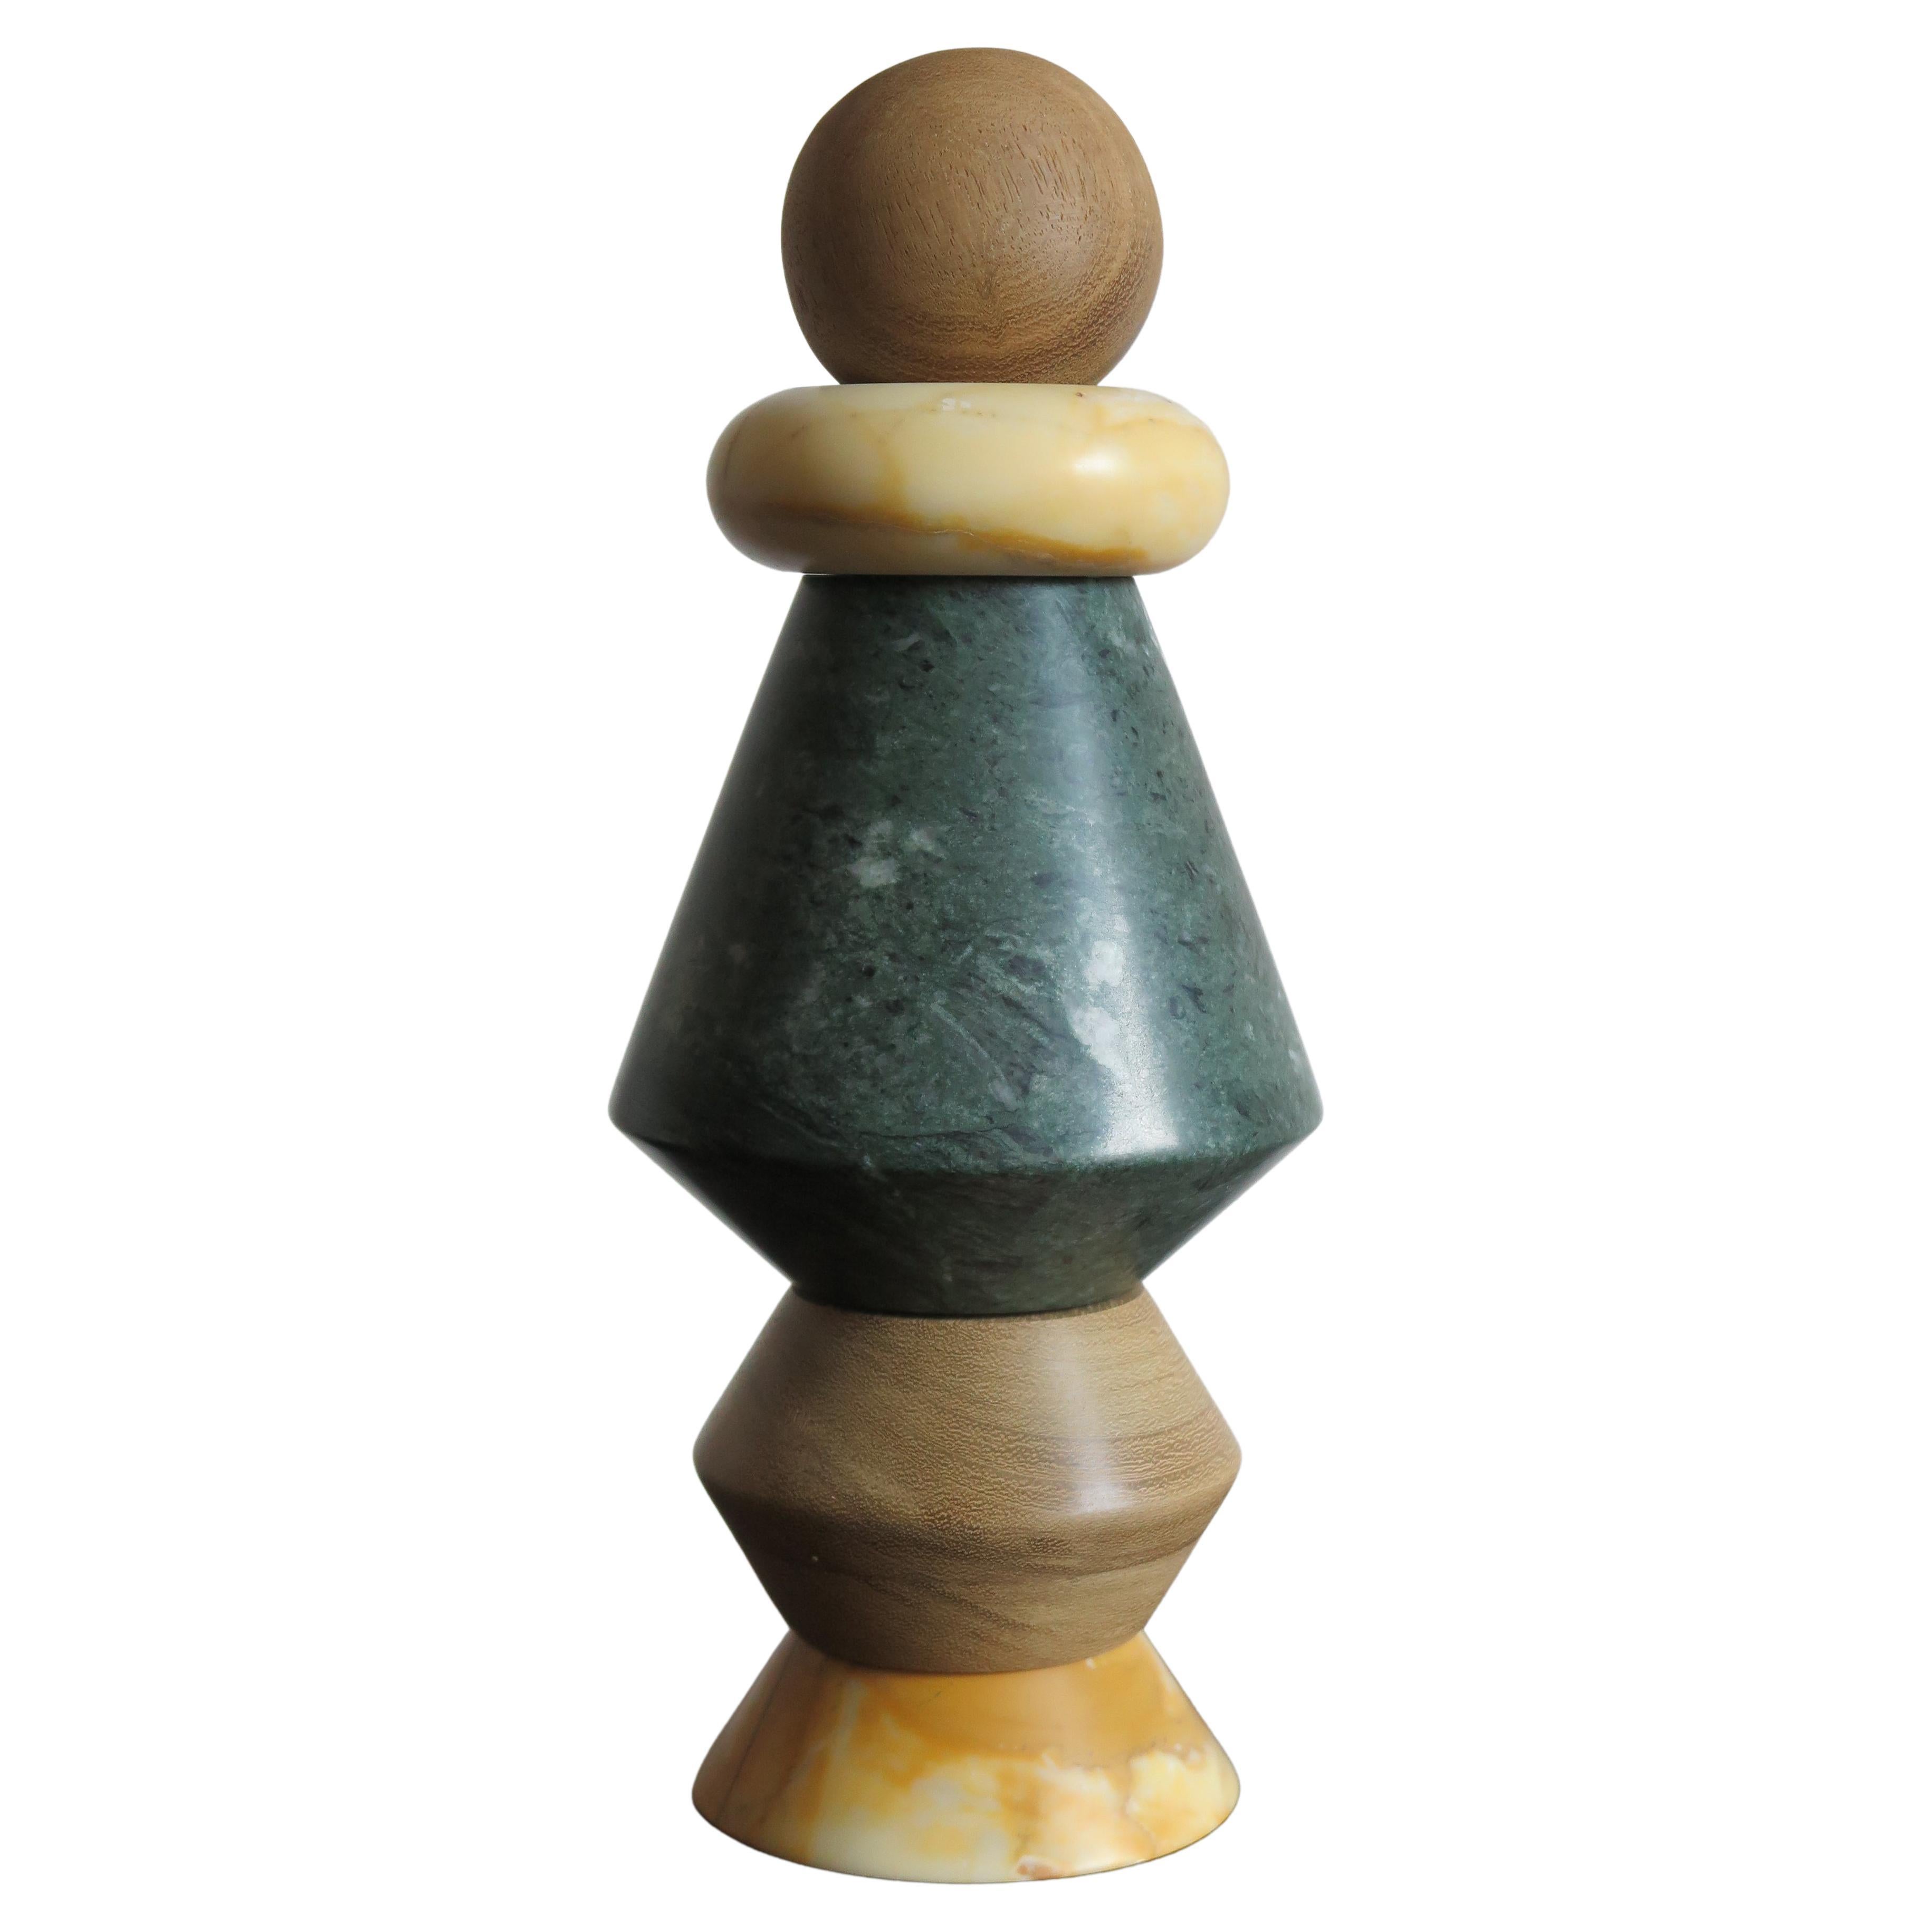 Marble and Wood Contemporary Sculpture, Flower Vase "iTotem"